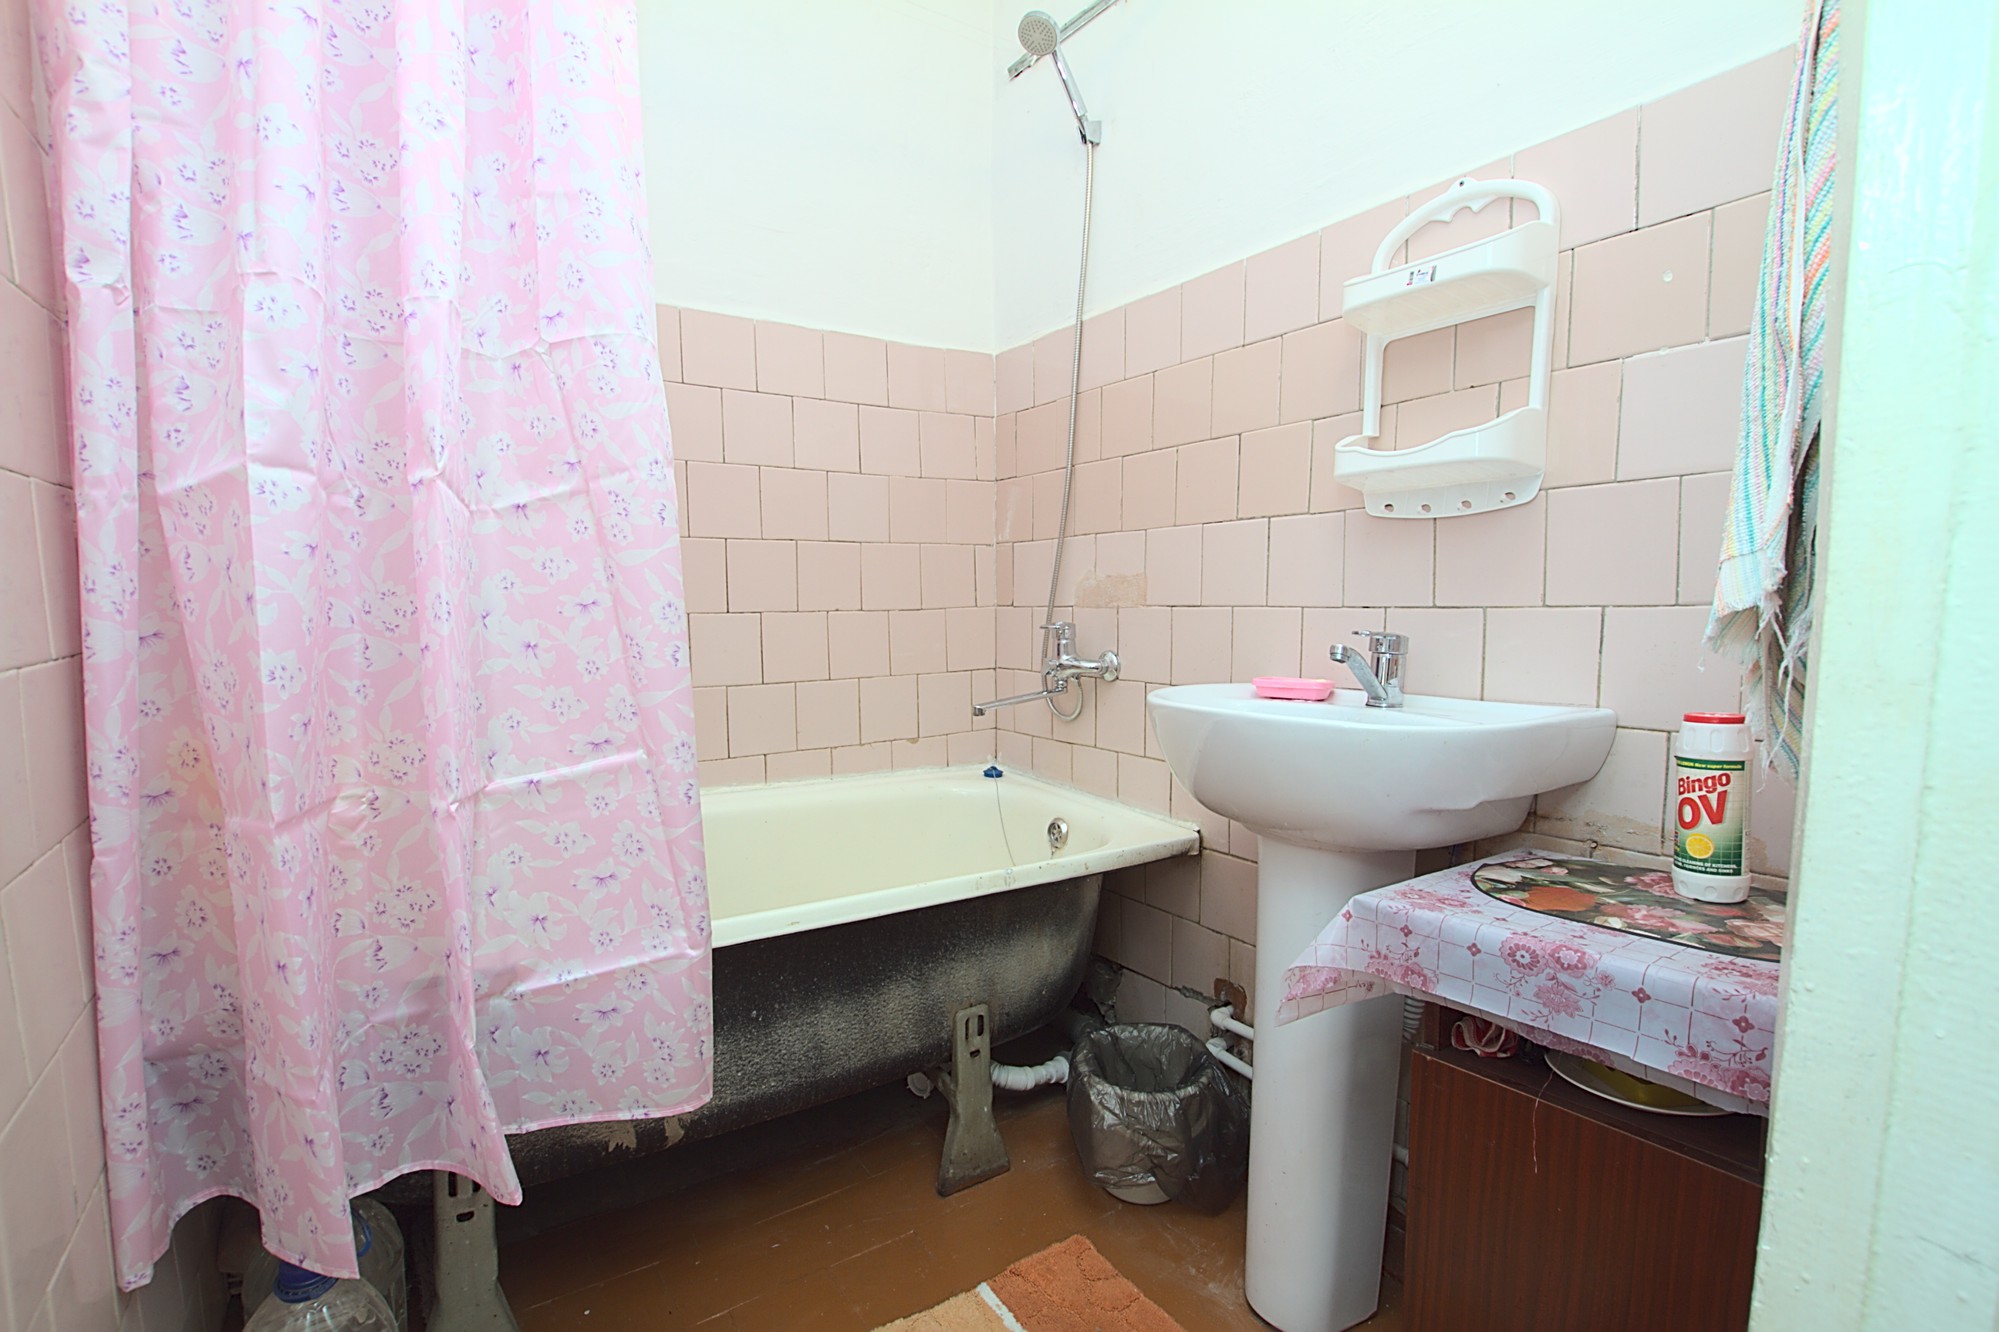 Cozy Nest is a 1 room apartment for rent in Chisinau, Moldova